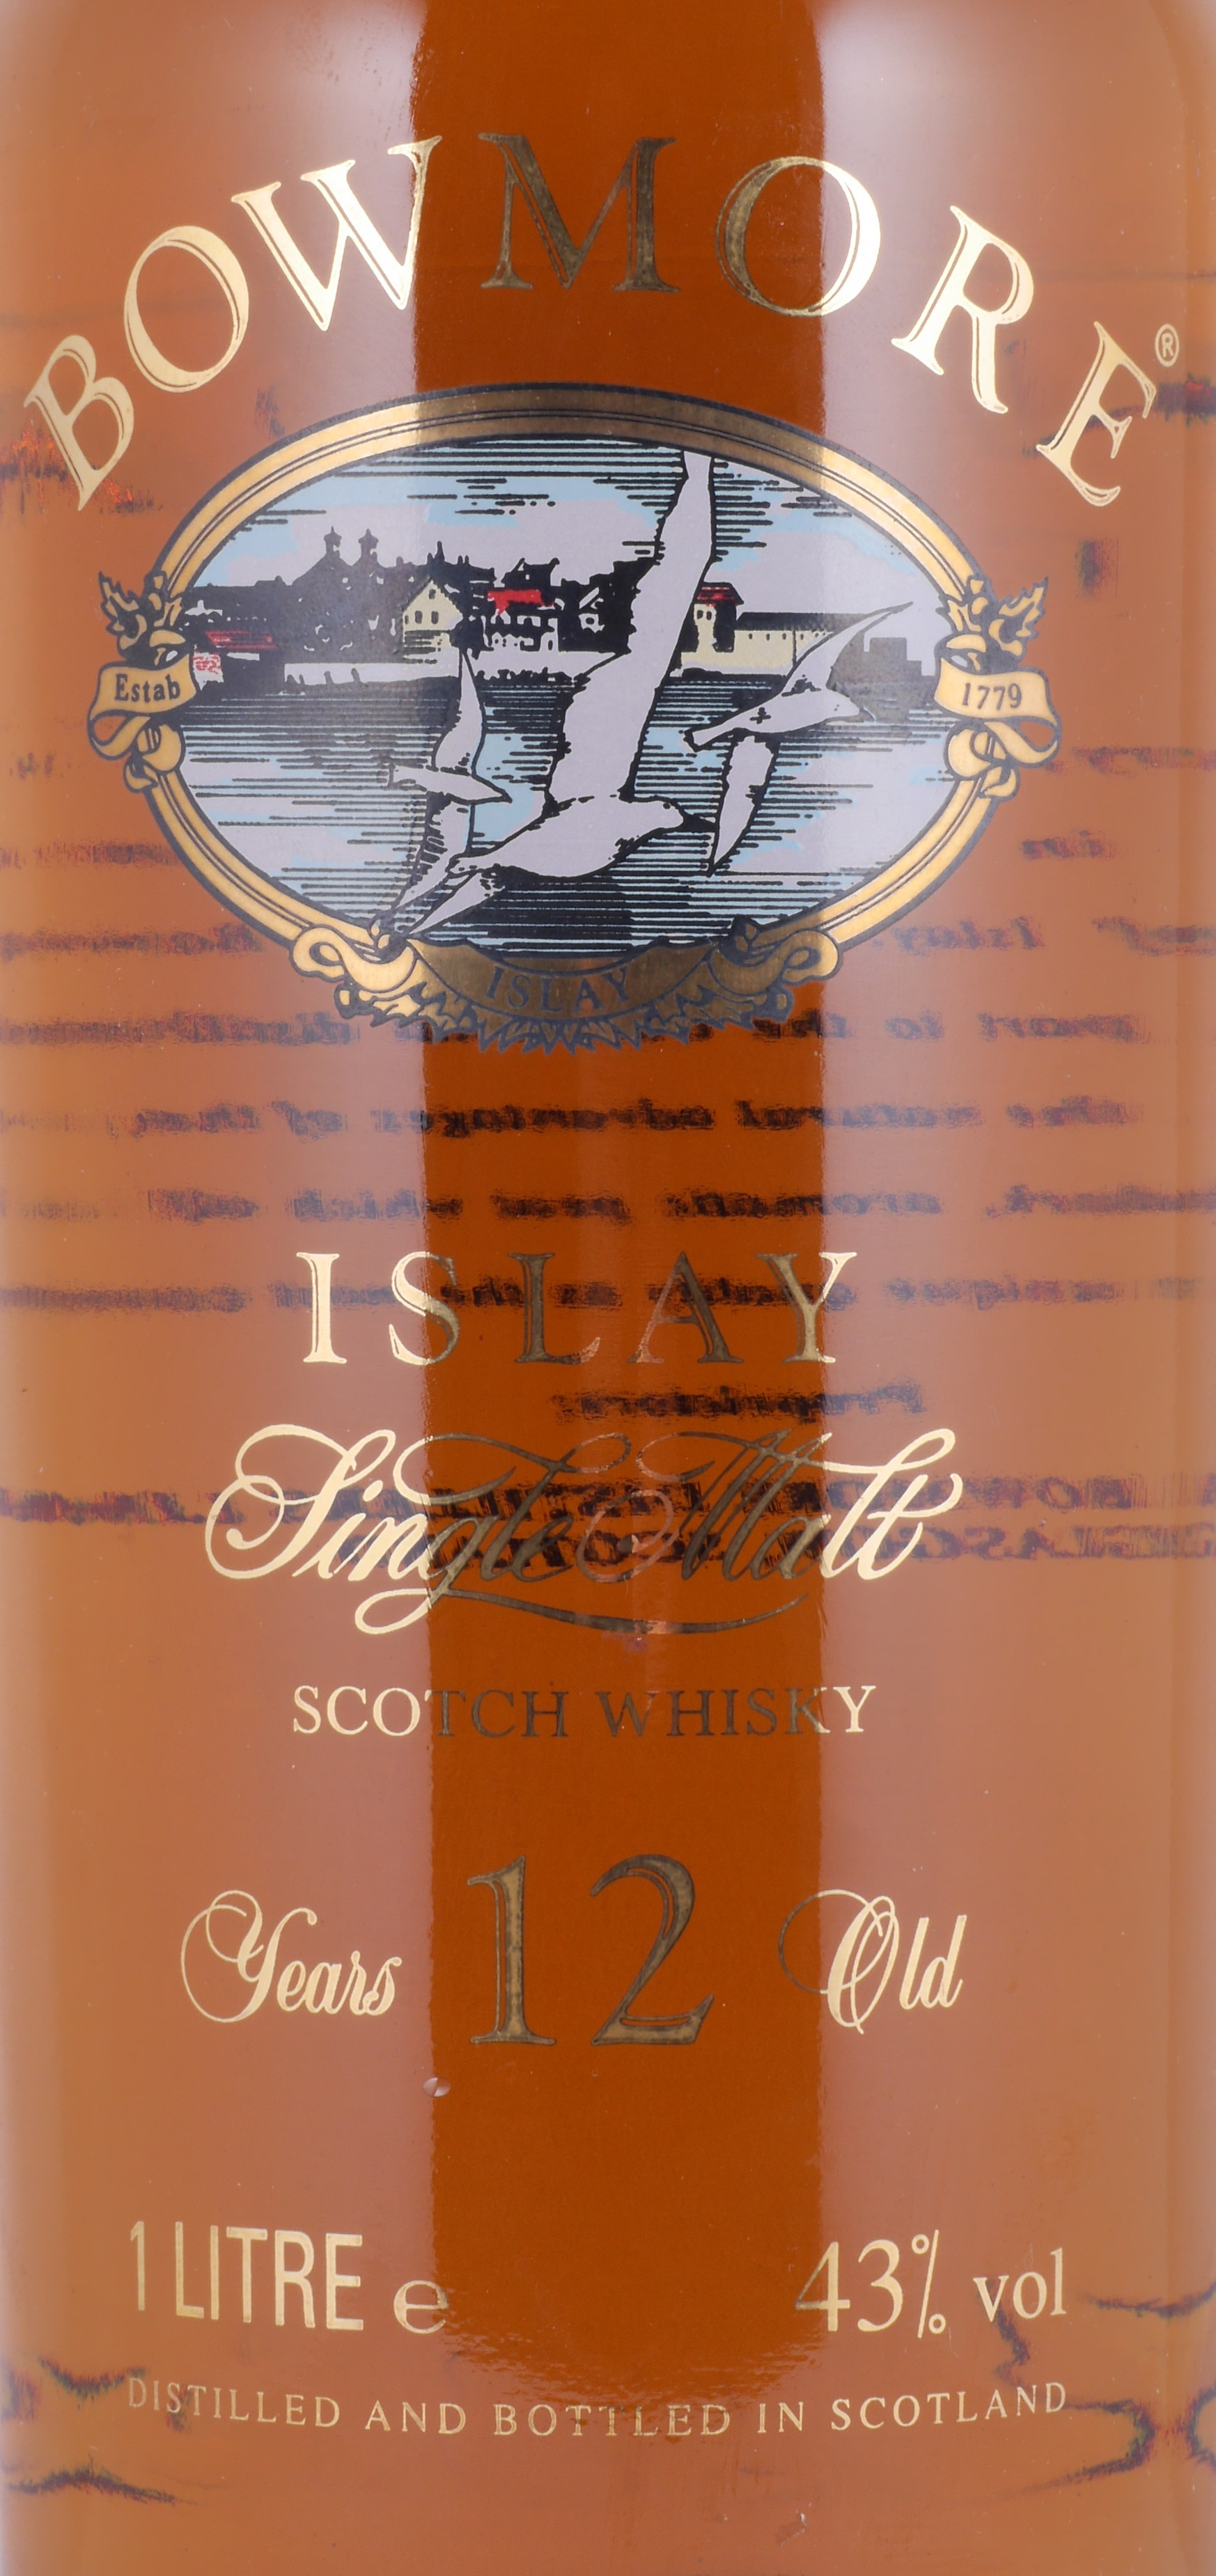 AmCom Printed 3 online 43.0% Whisky Bowmore Single Glass at Islay Label 12 ABV Malt secure Buy Scotch with Years-old Icons